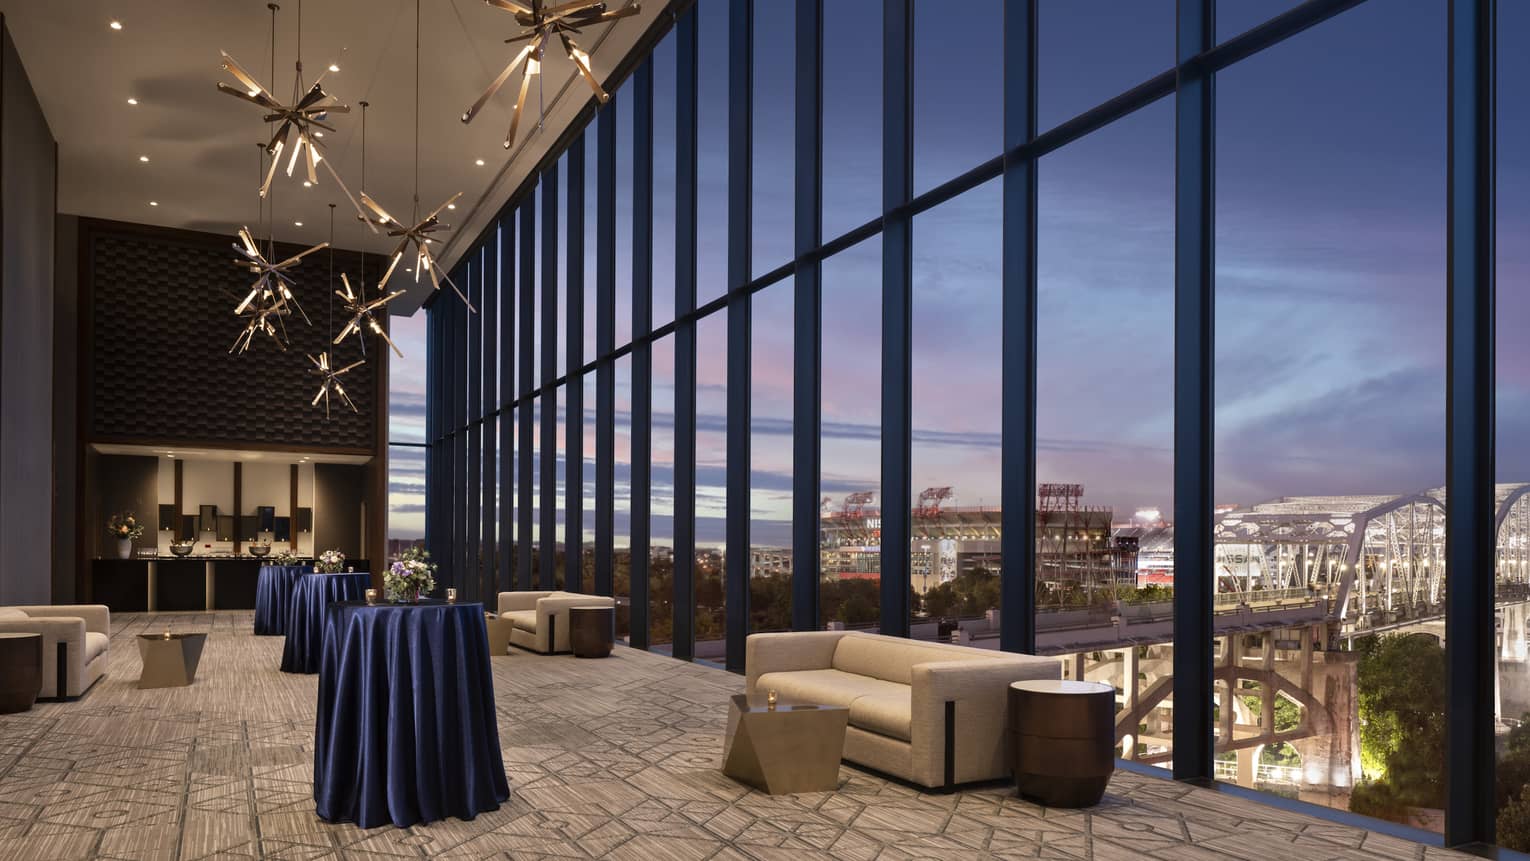 Indoor pre-function space with a wall of windows looking out to Nashville at dusk